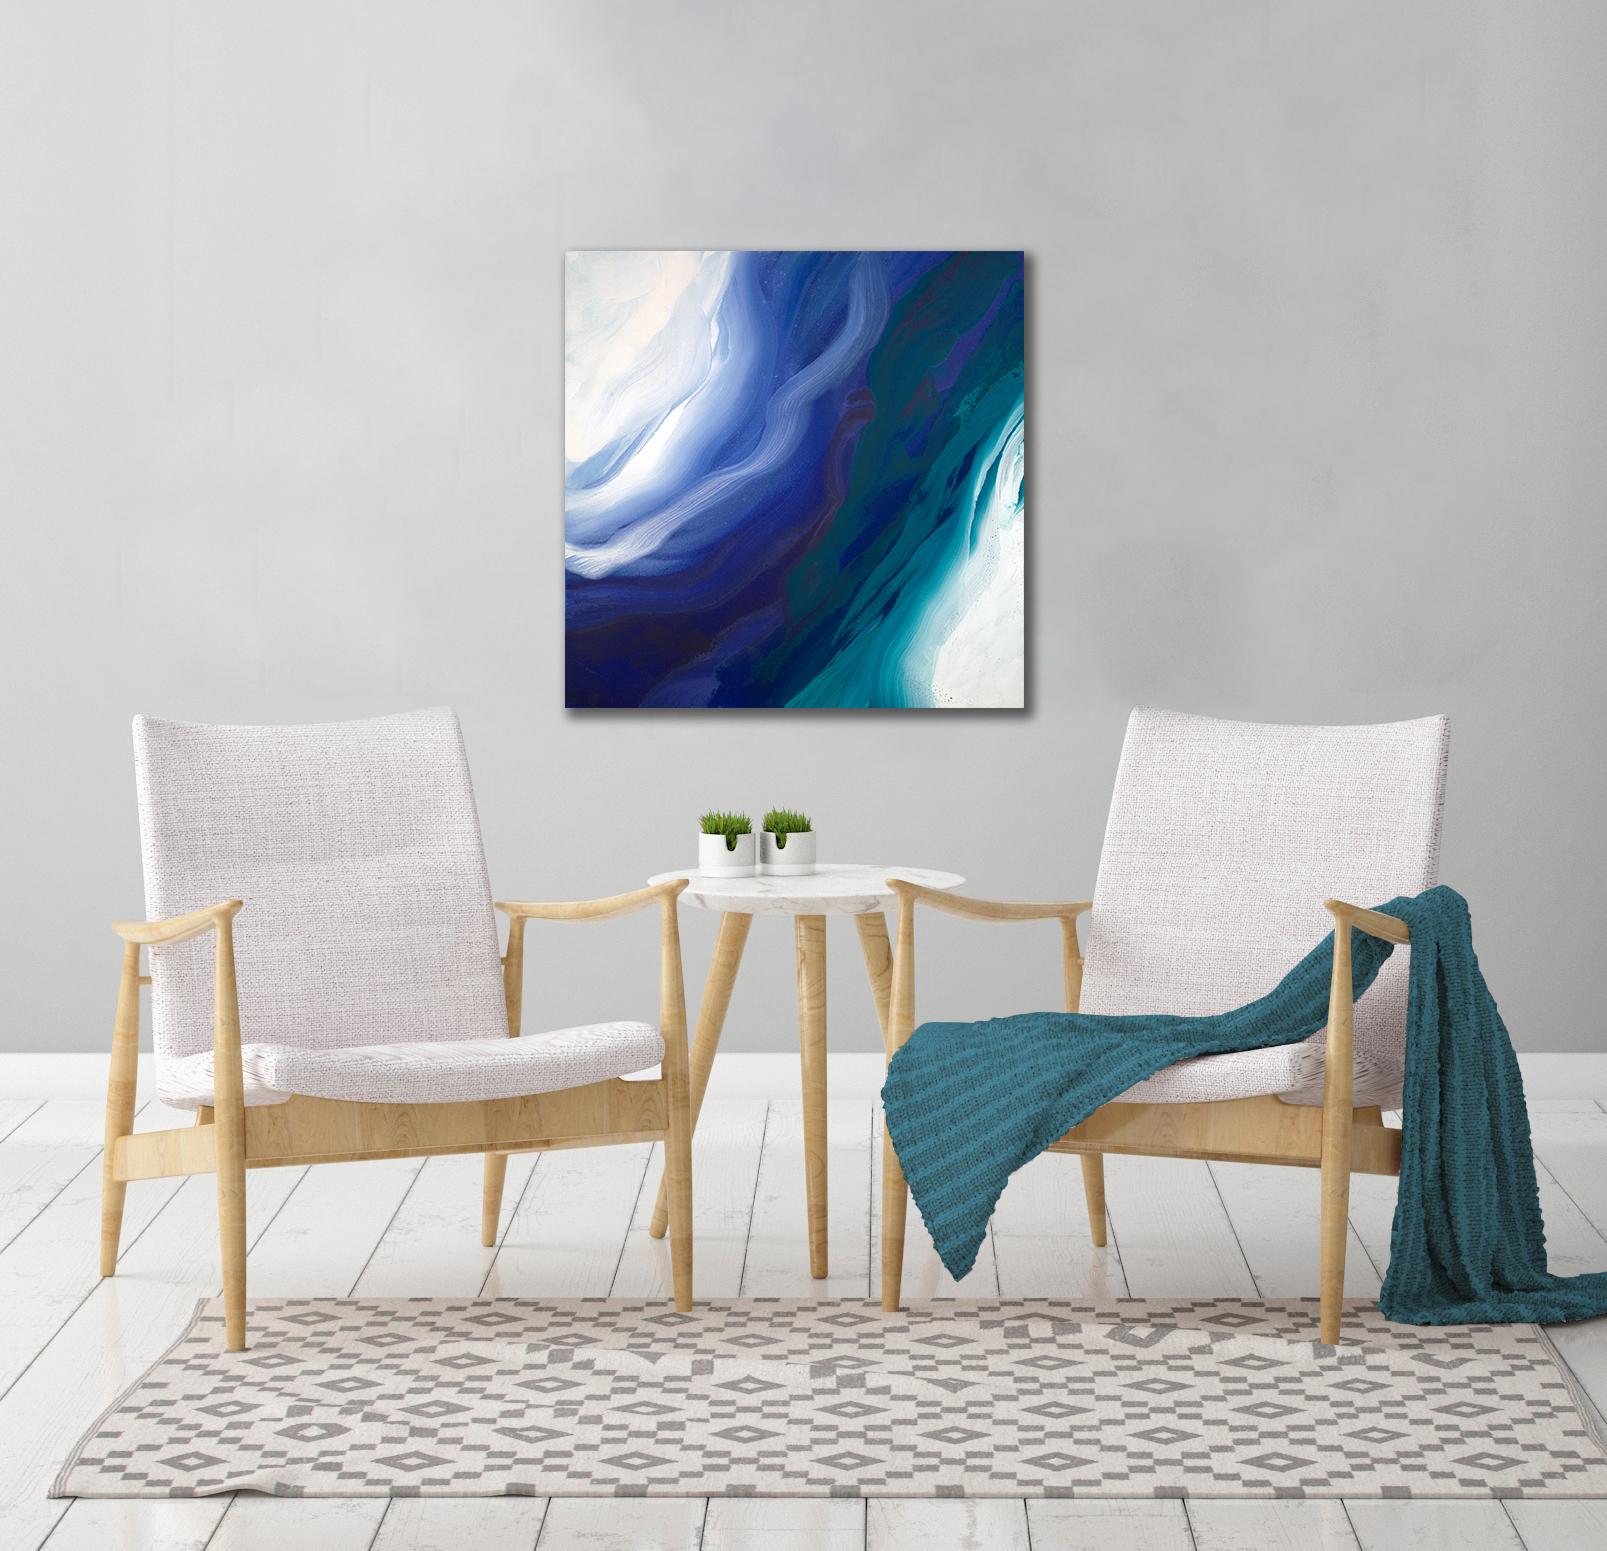 water, wave, teal, turquoise, sea, navy, ocean, sky, droplets, statement, movement, blue and white, drip, minimalist, contemporary, abstraction, gestural, influenced by: Pat Steir

ABOUT TEODORA GUERERRA

BIOGRAPHY
Teodora Guererra’s abstract